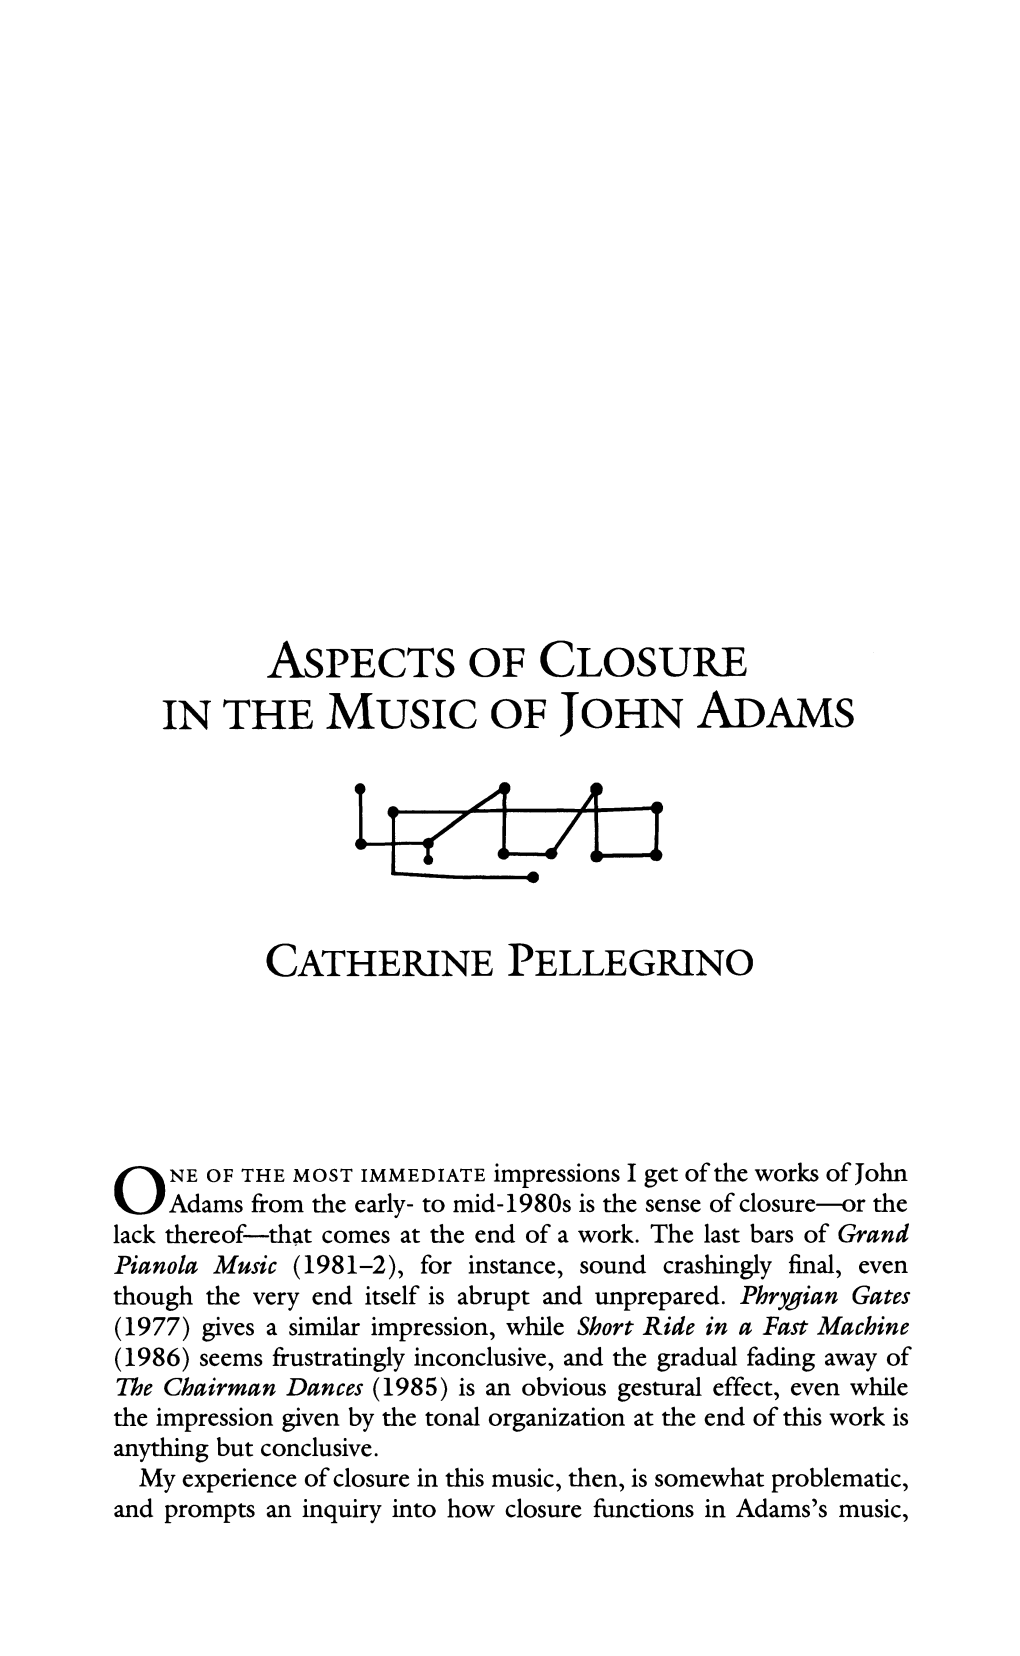 Aspects of Closure in the Music of John Adams